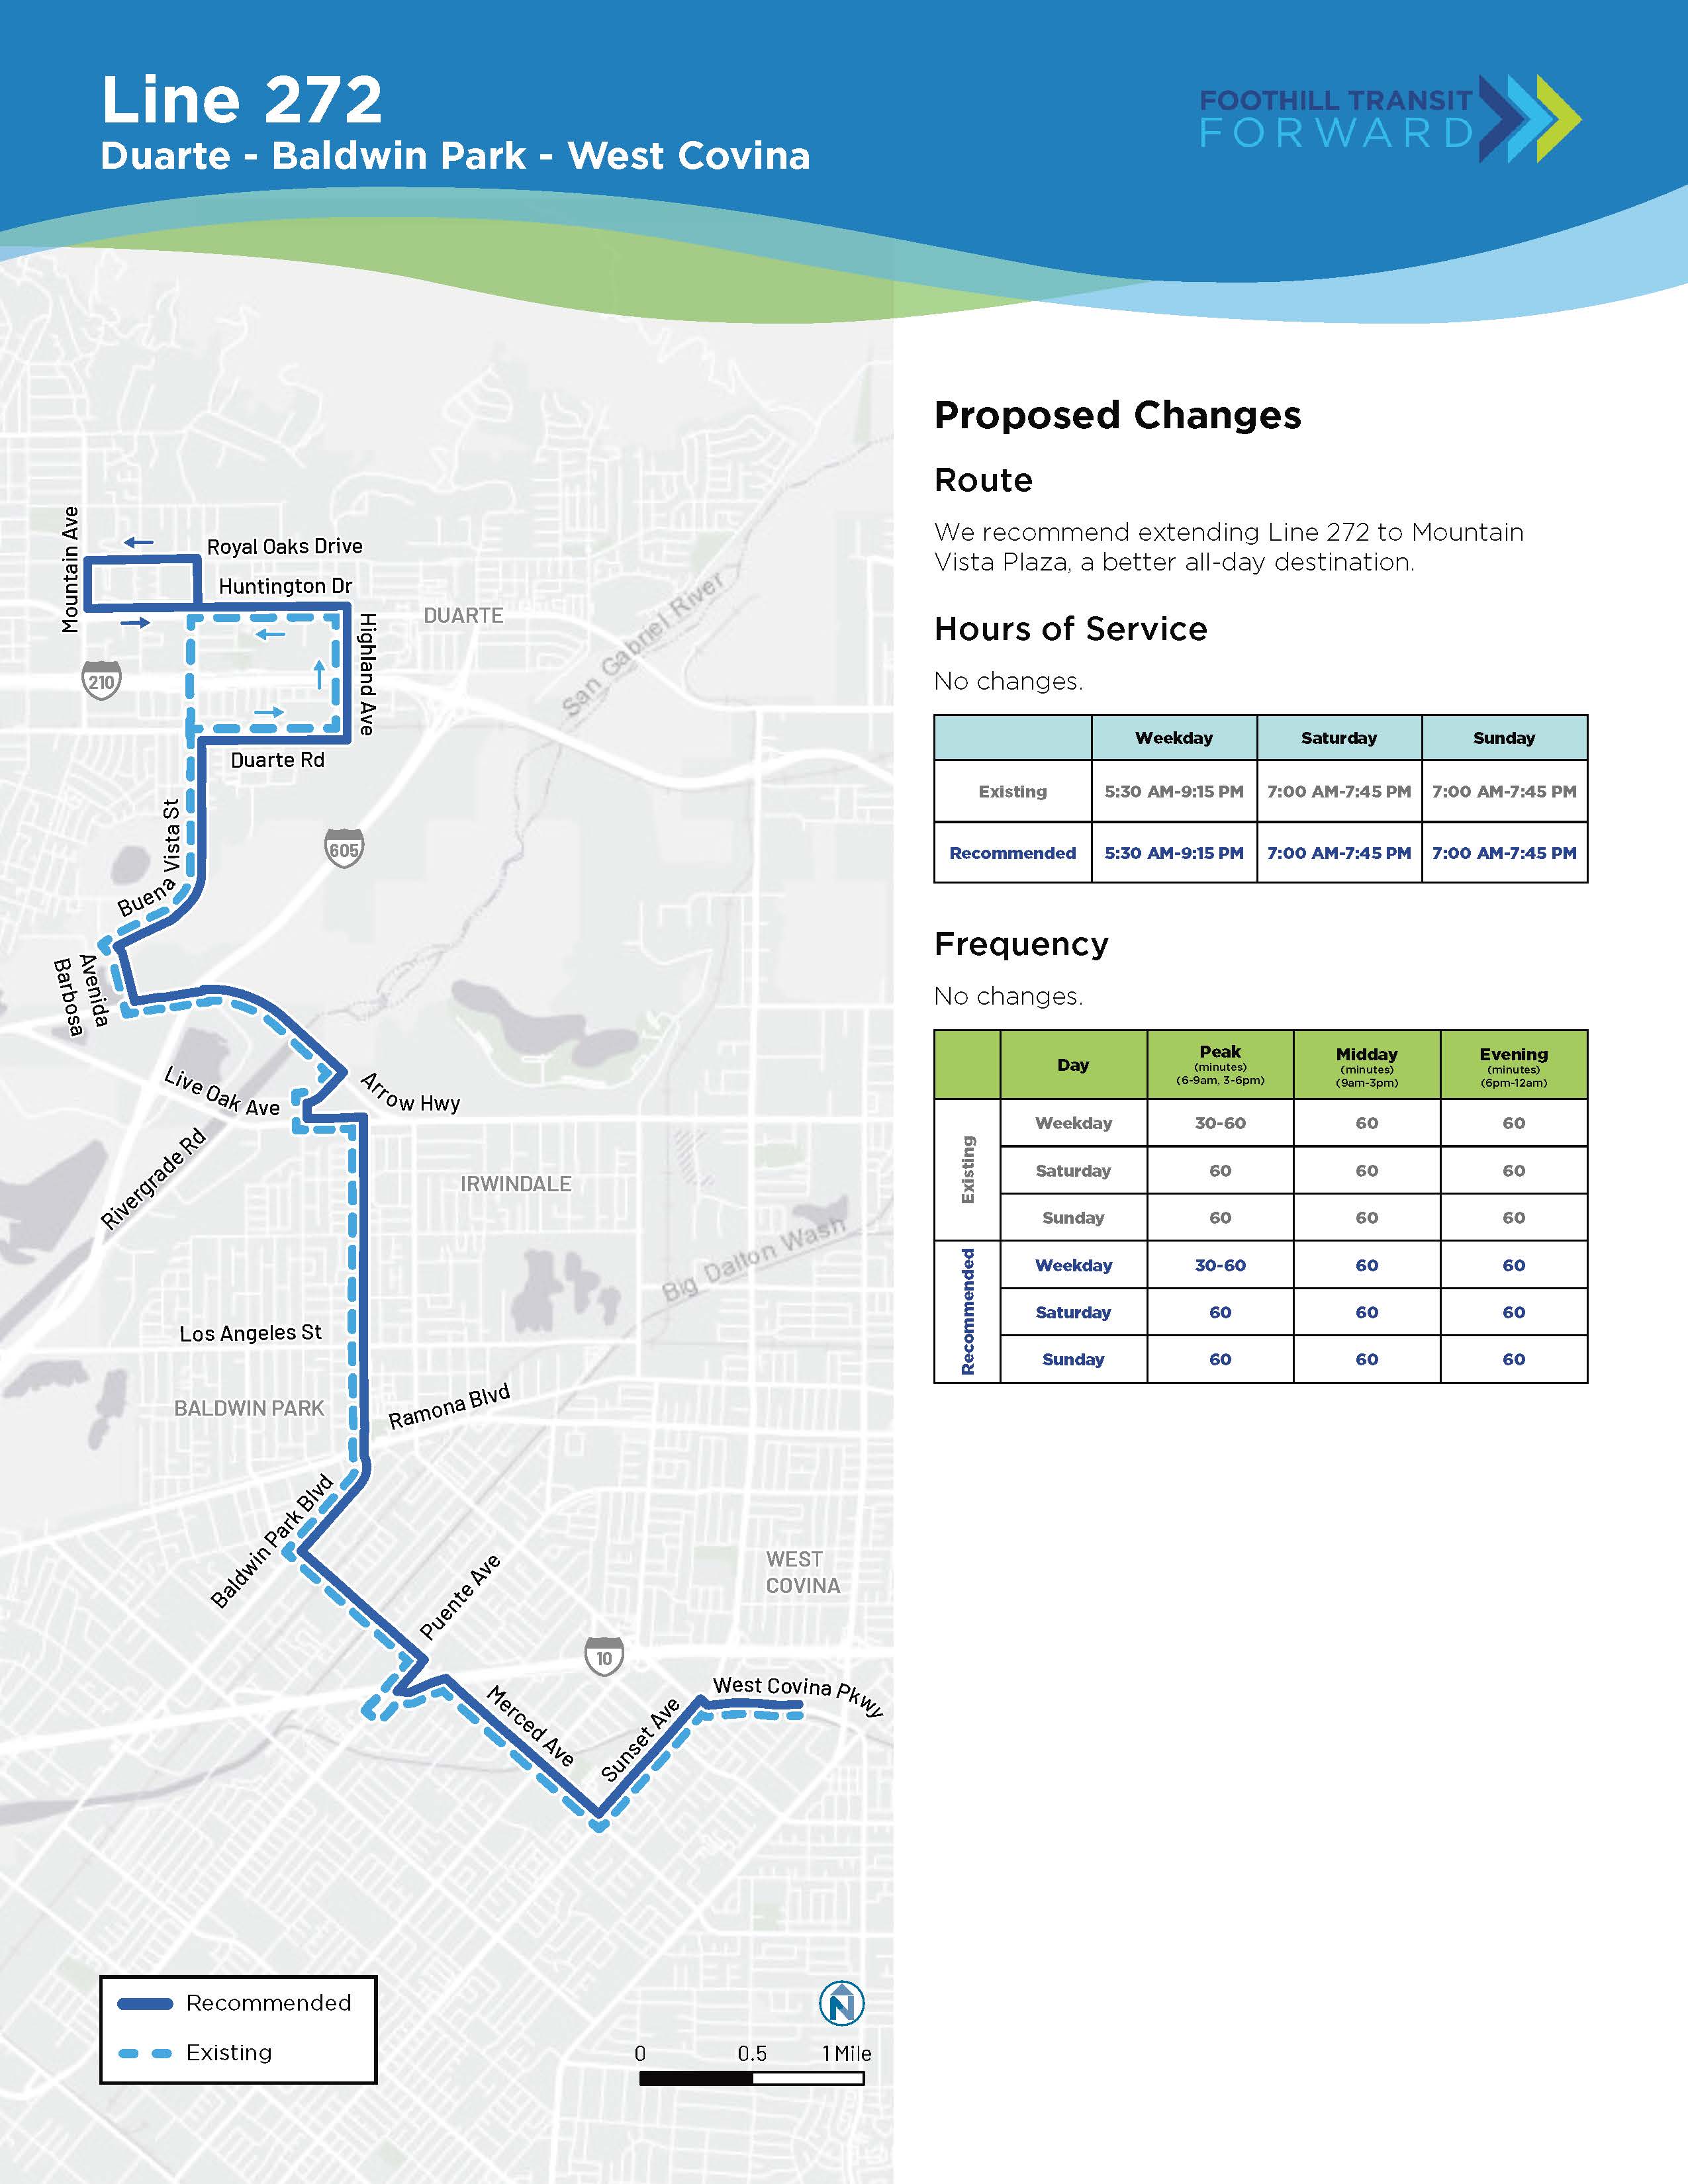 Proposed Changes: Route: We recommend extending Line 272 to Mountain Vista Plaza, a better all-day destination. Hours of Service: No changes. Frequency: No changes.